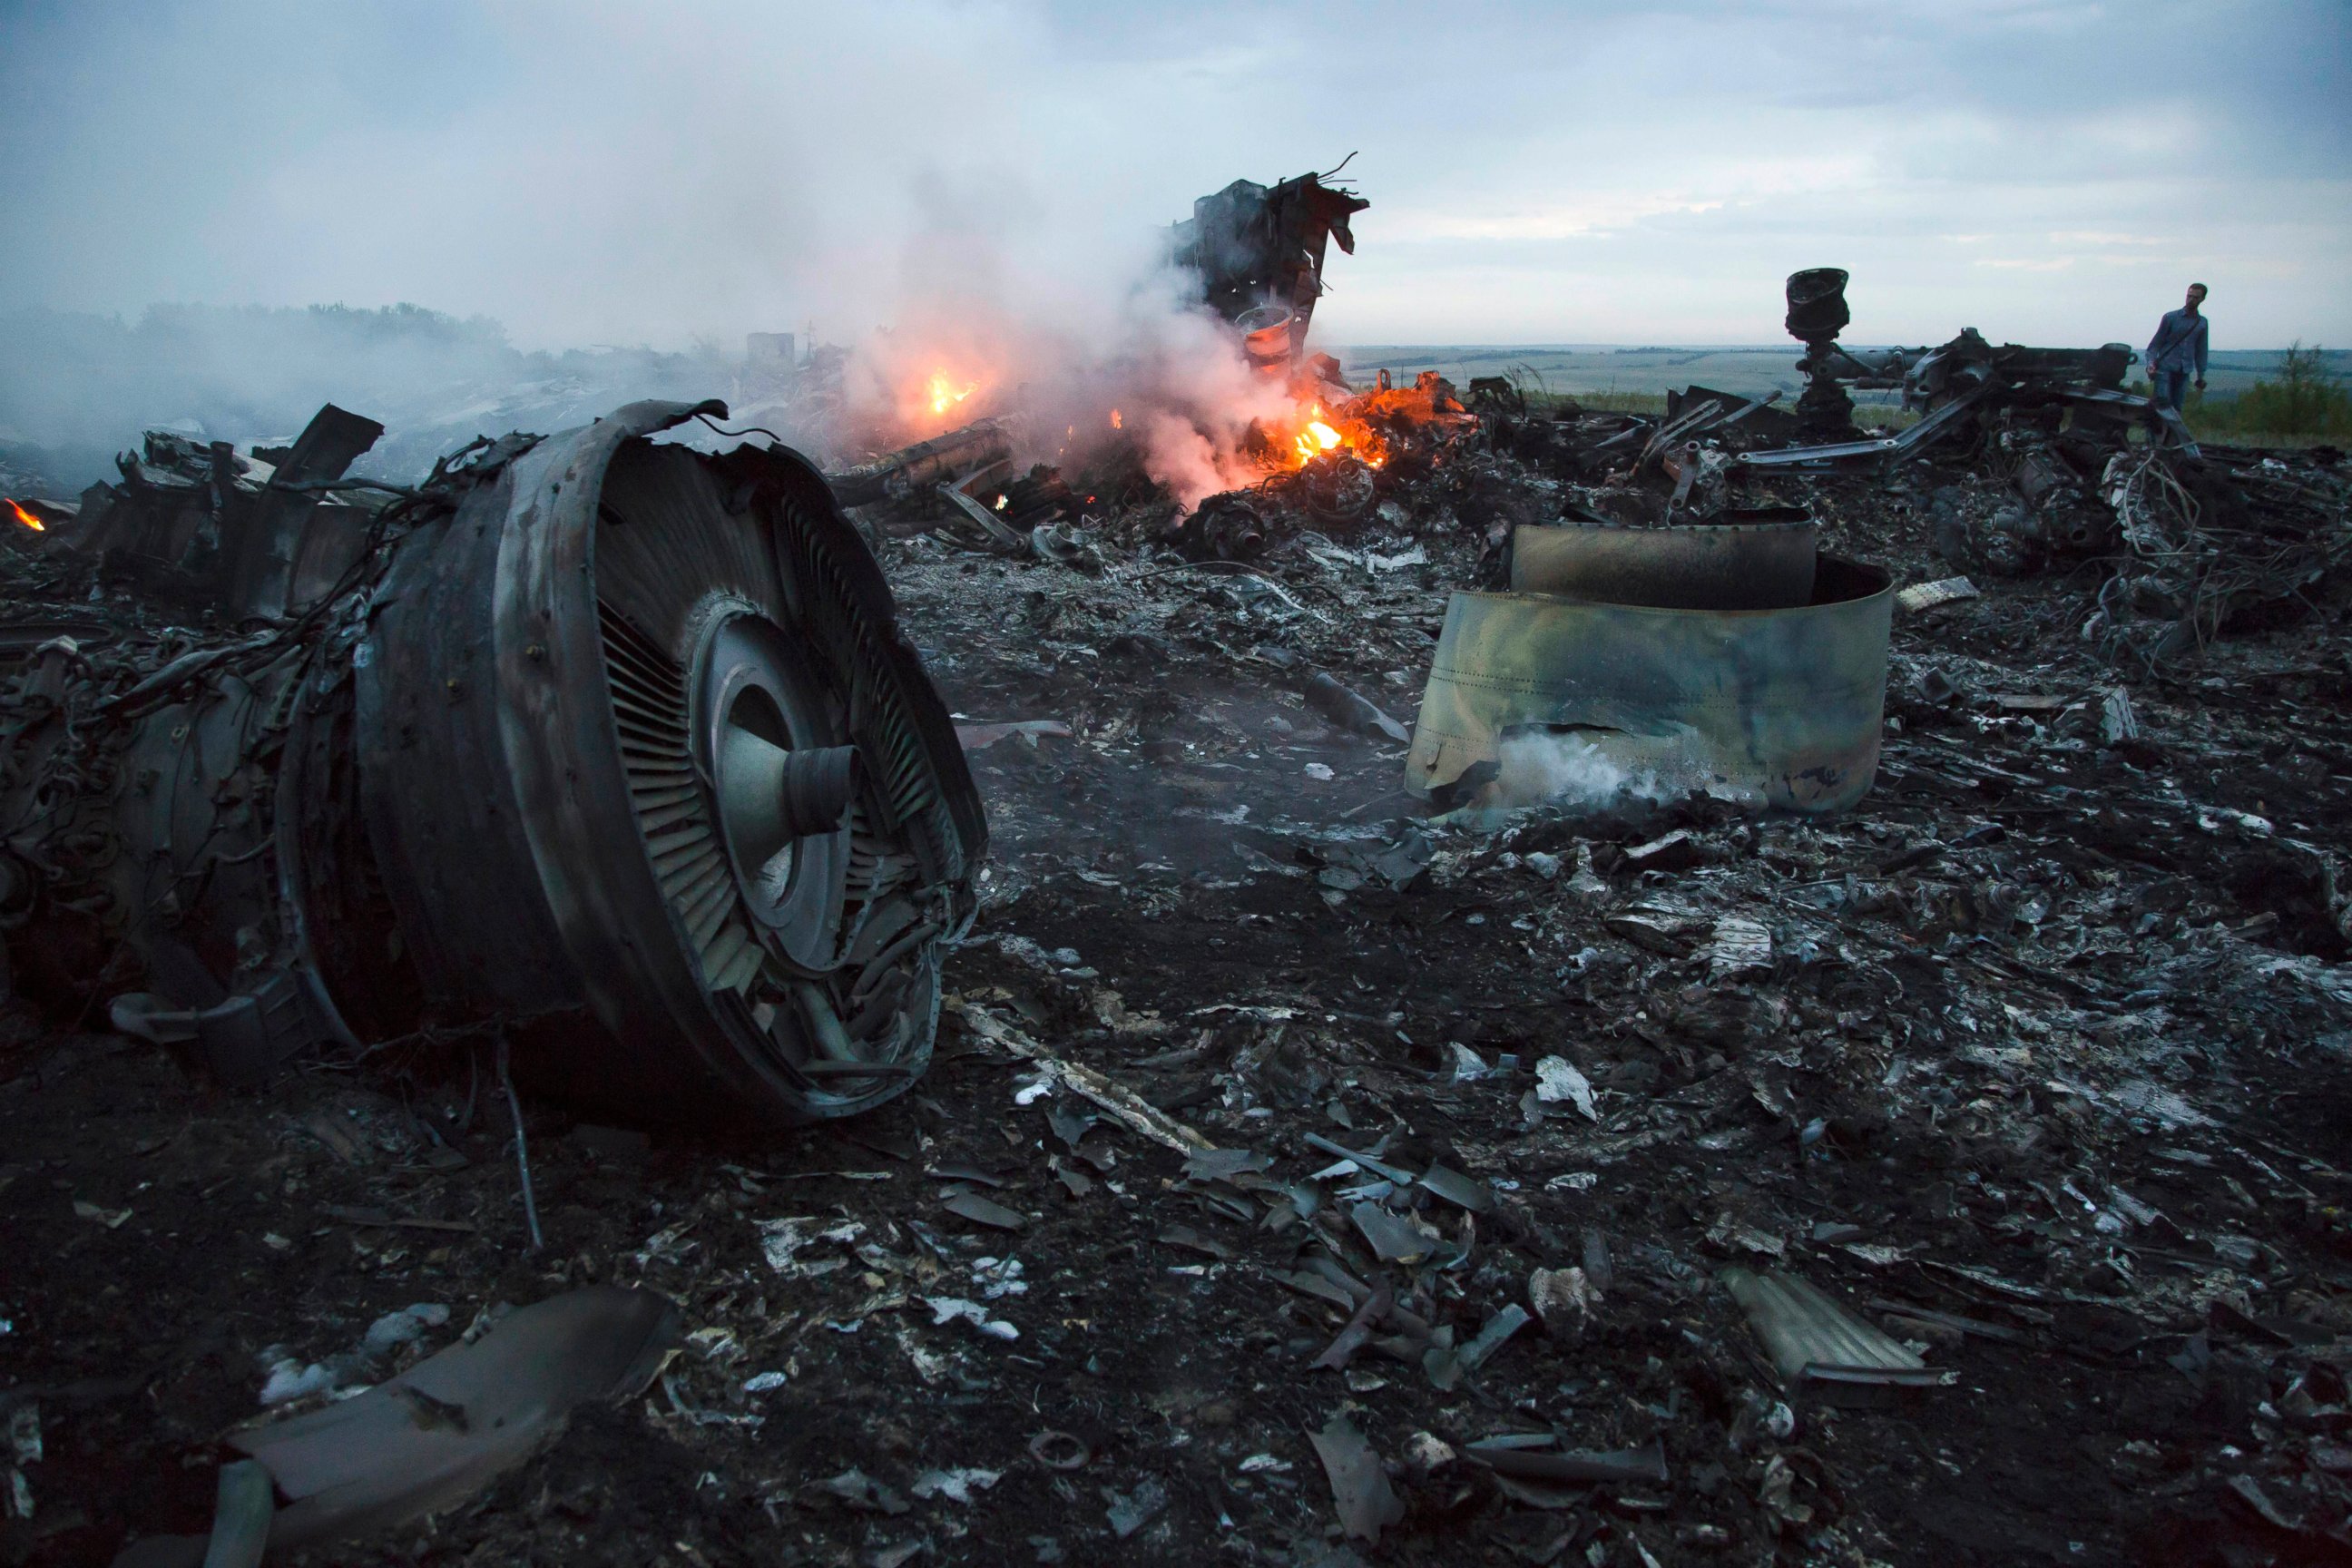 PHOTO: A man walks amongst the debris at the crash site of a passenger plane Malaysia MH17 near the village of  Hrabove, Ukraine, July 17, 2014.